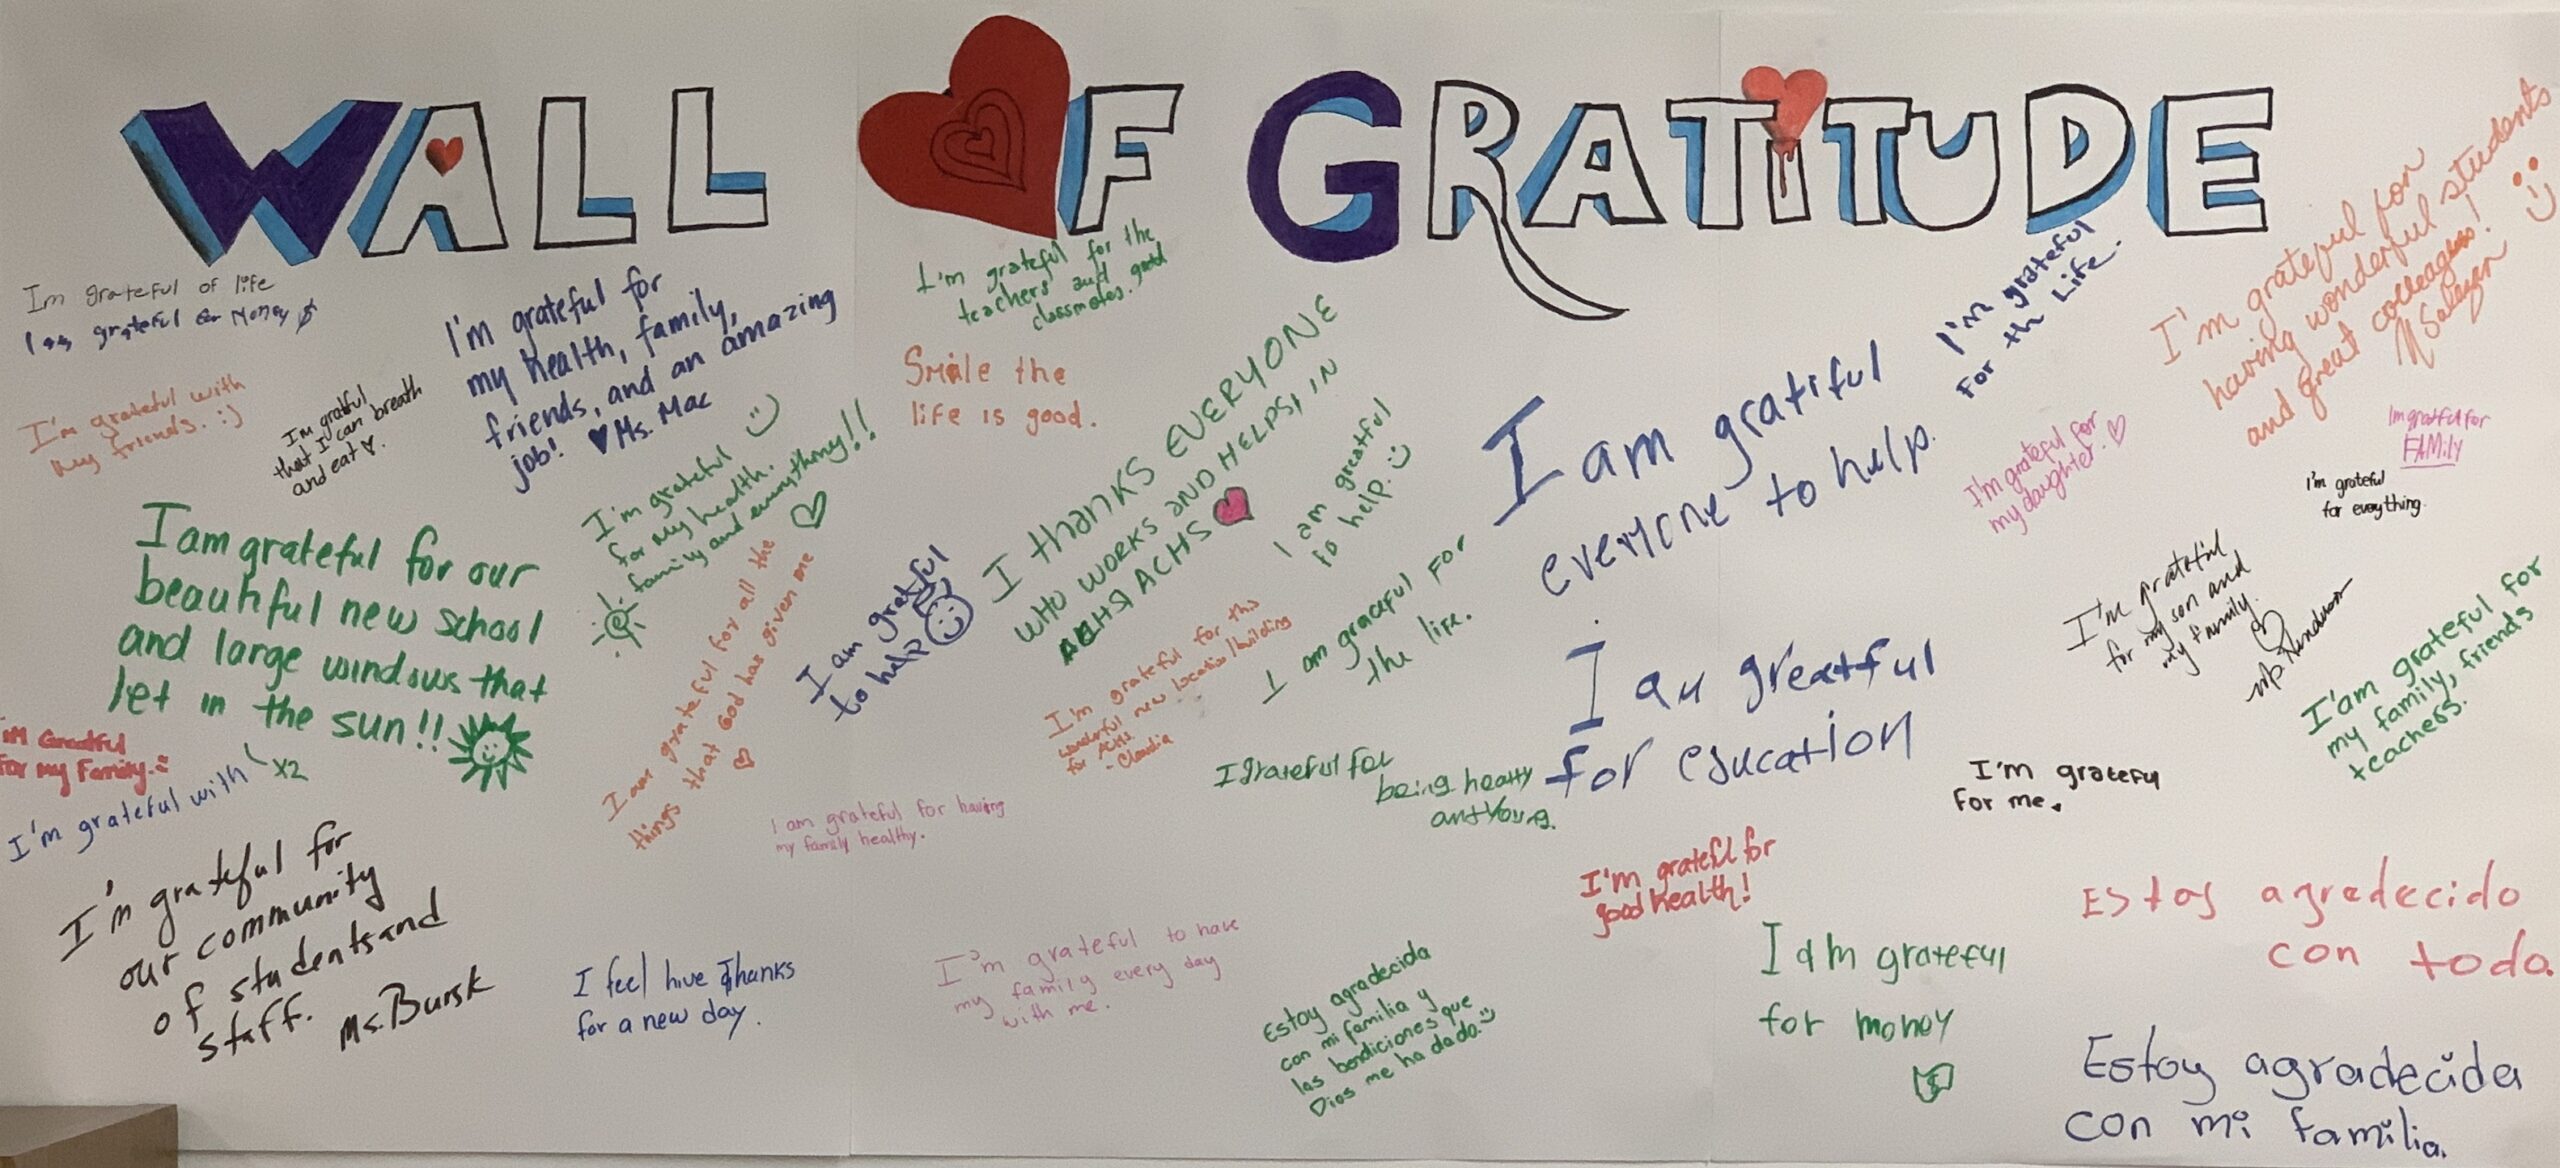 ACHS Wall of Gratitude-words of thanks from staff and students